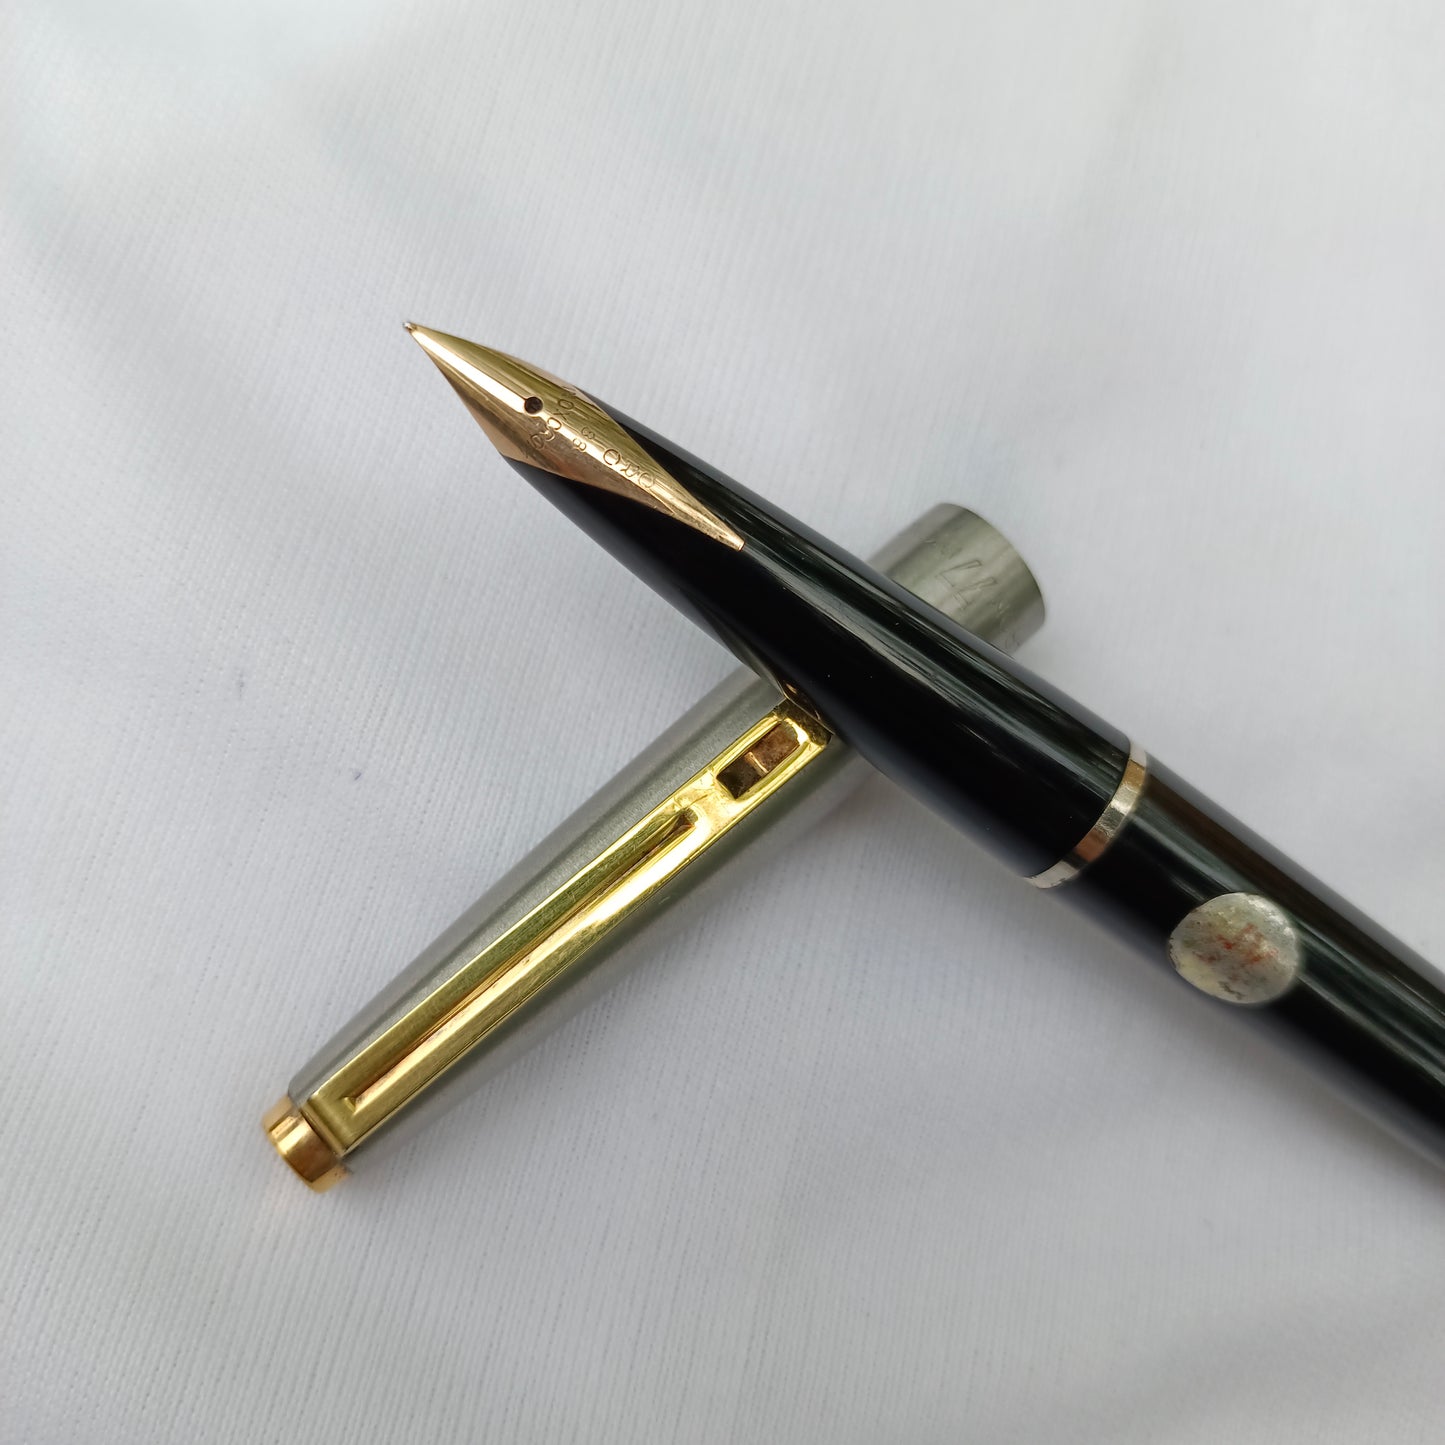 Inoxcrom 77 Fountain Pen Made in Spain